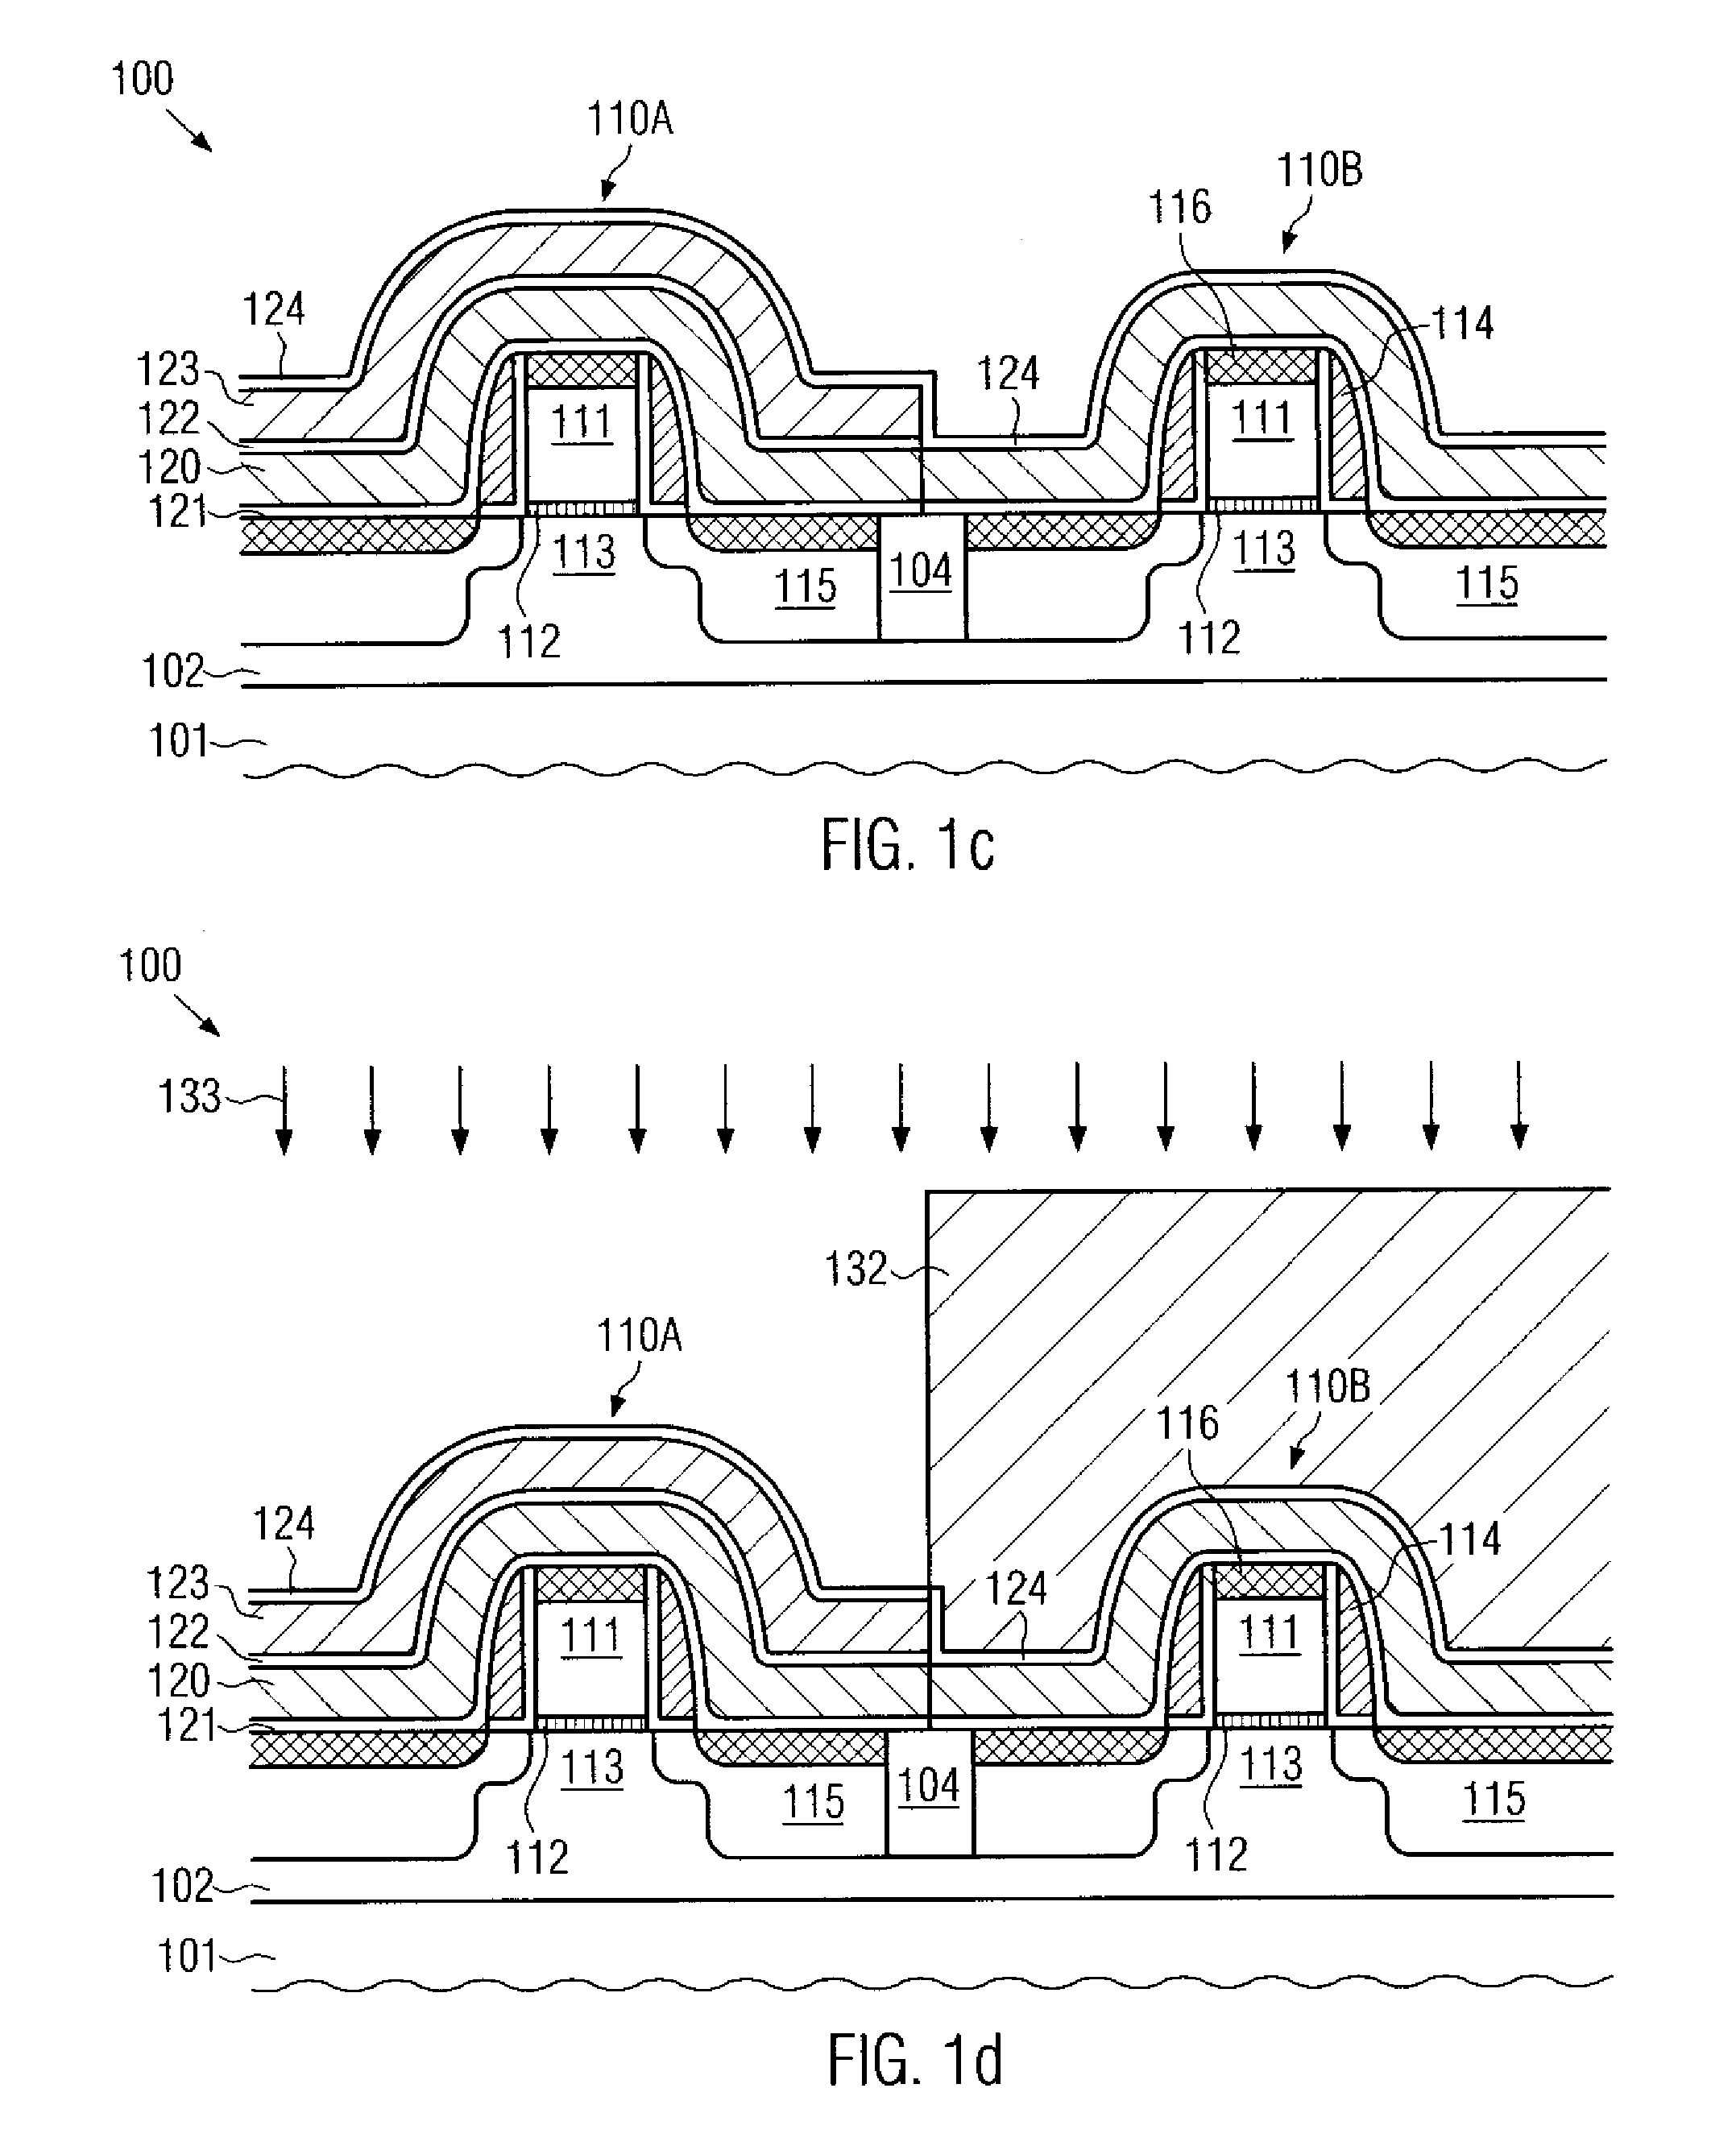 Method for reducing resist poisoning during patterning of stressed nitrogen-containing layers in a semiconductor device